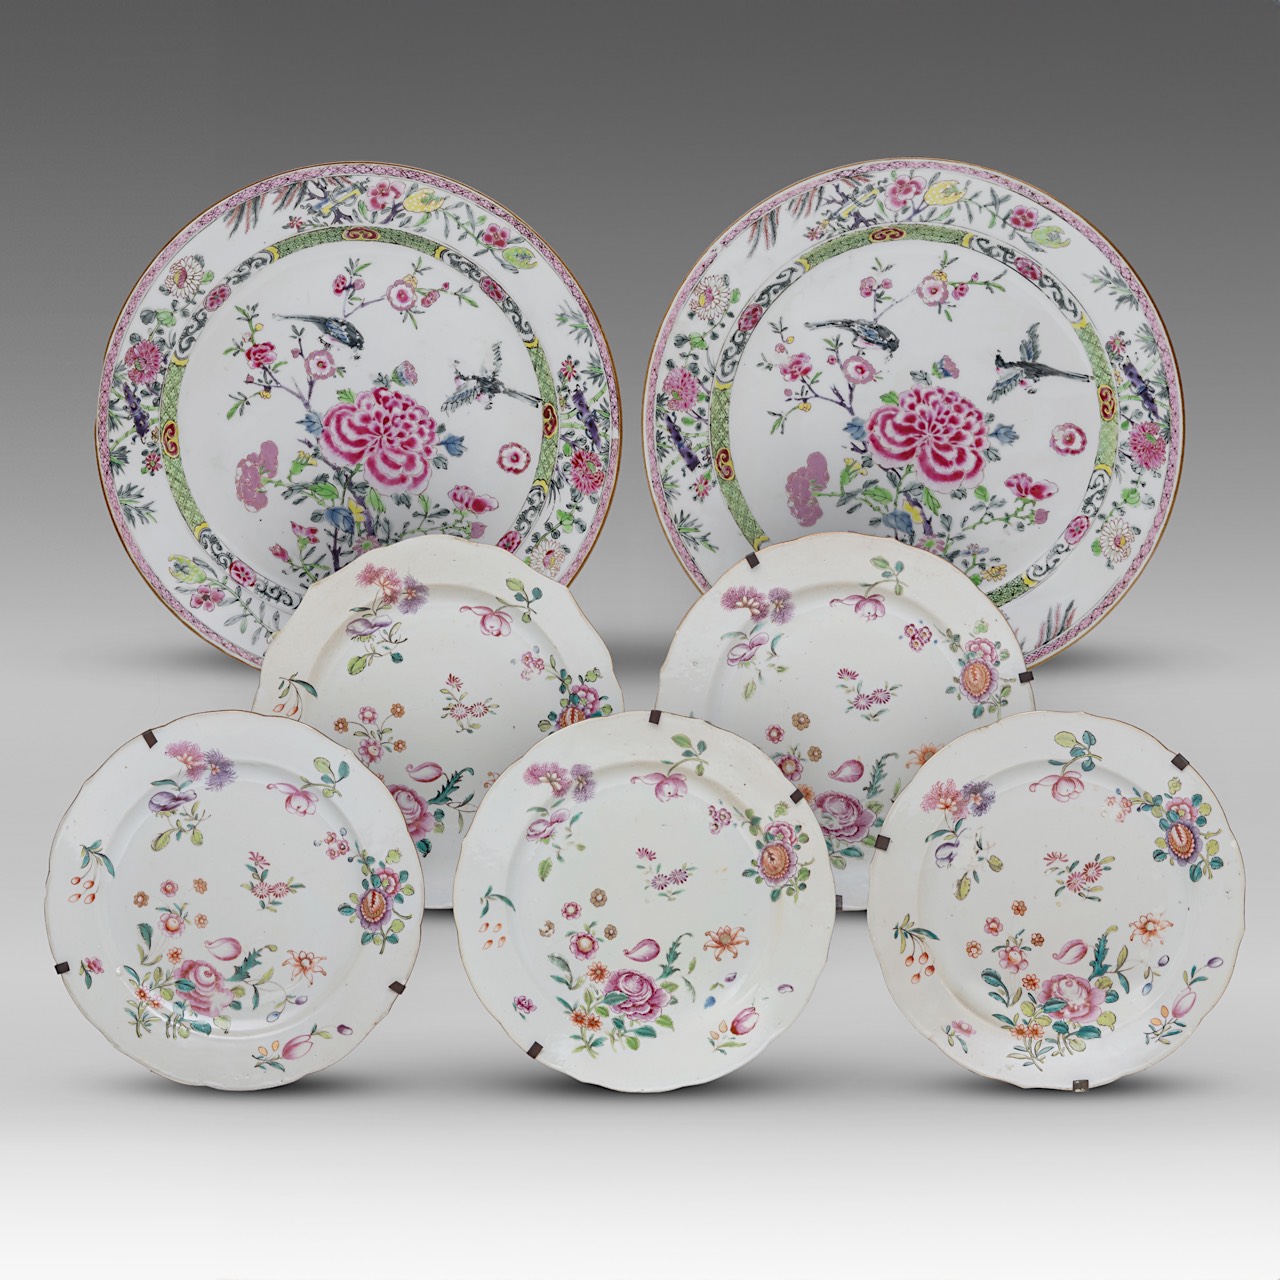 A series of two Chinese famille rose 'Magpies and Peonies' large plates and five famille rose 'Blume